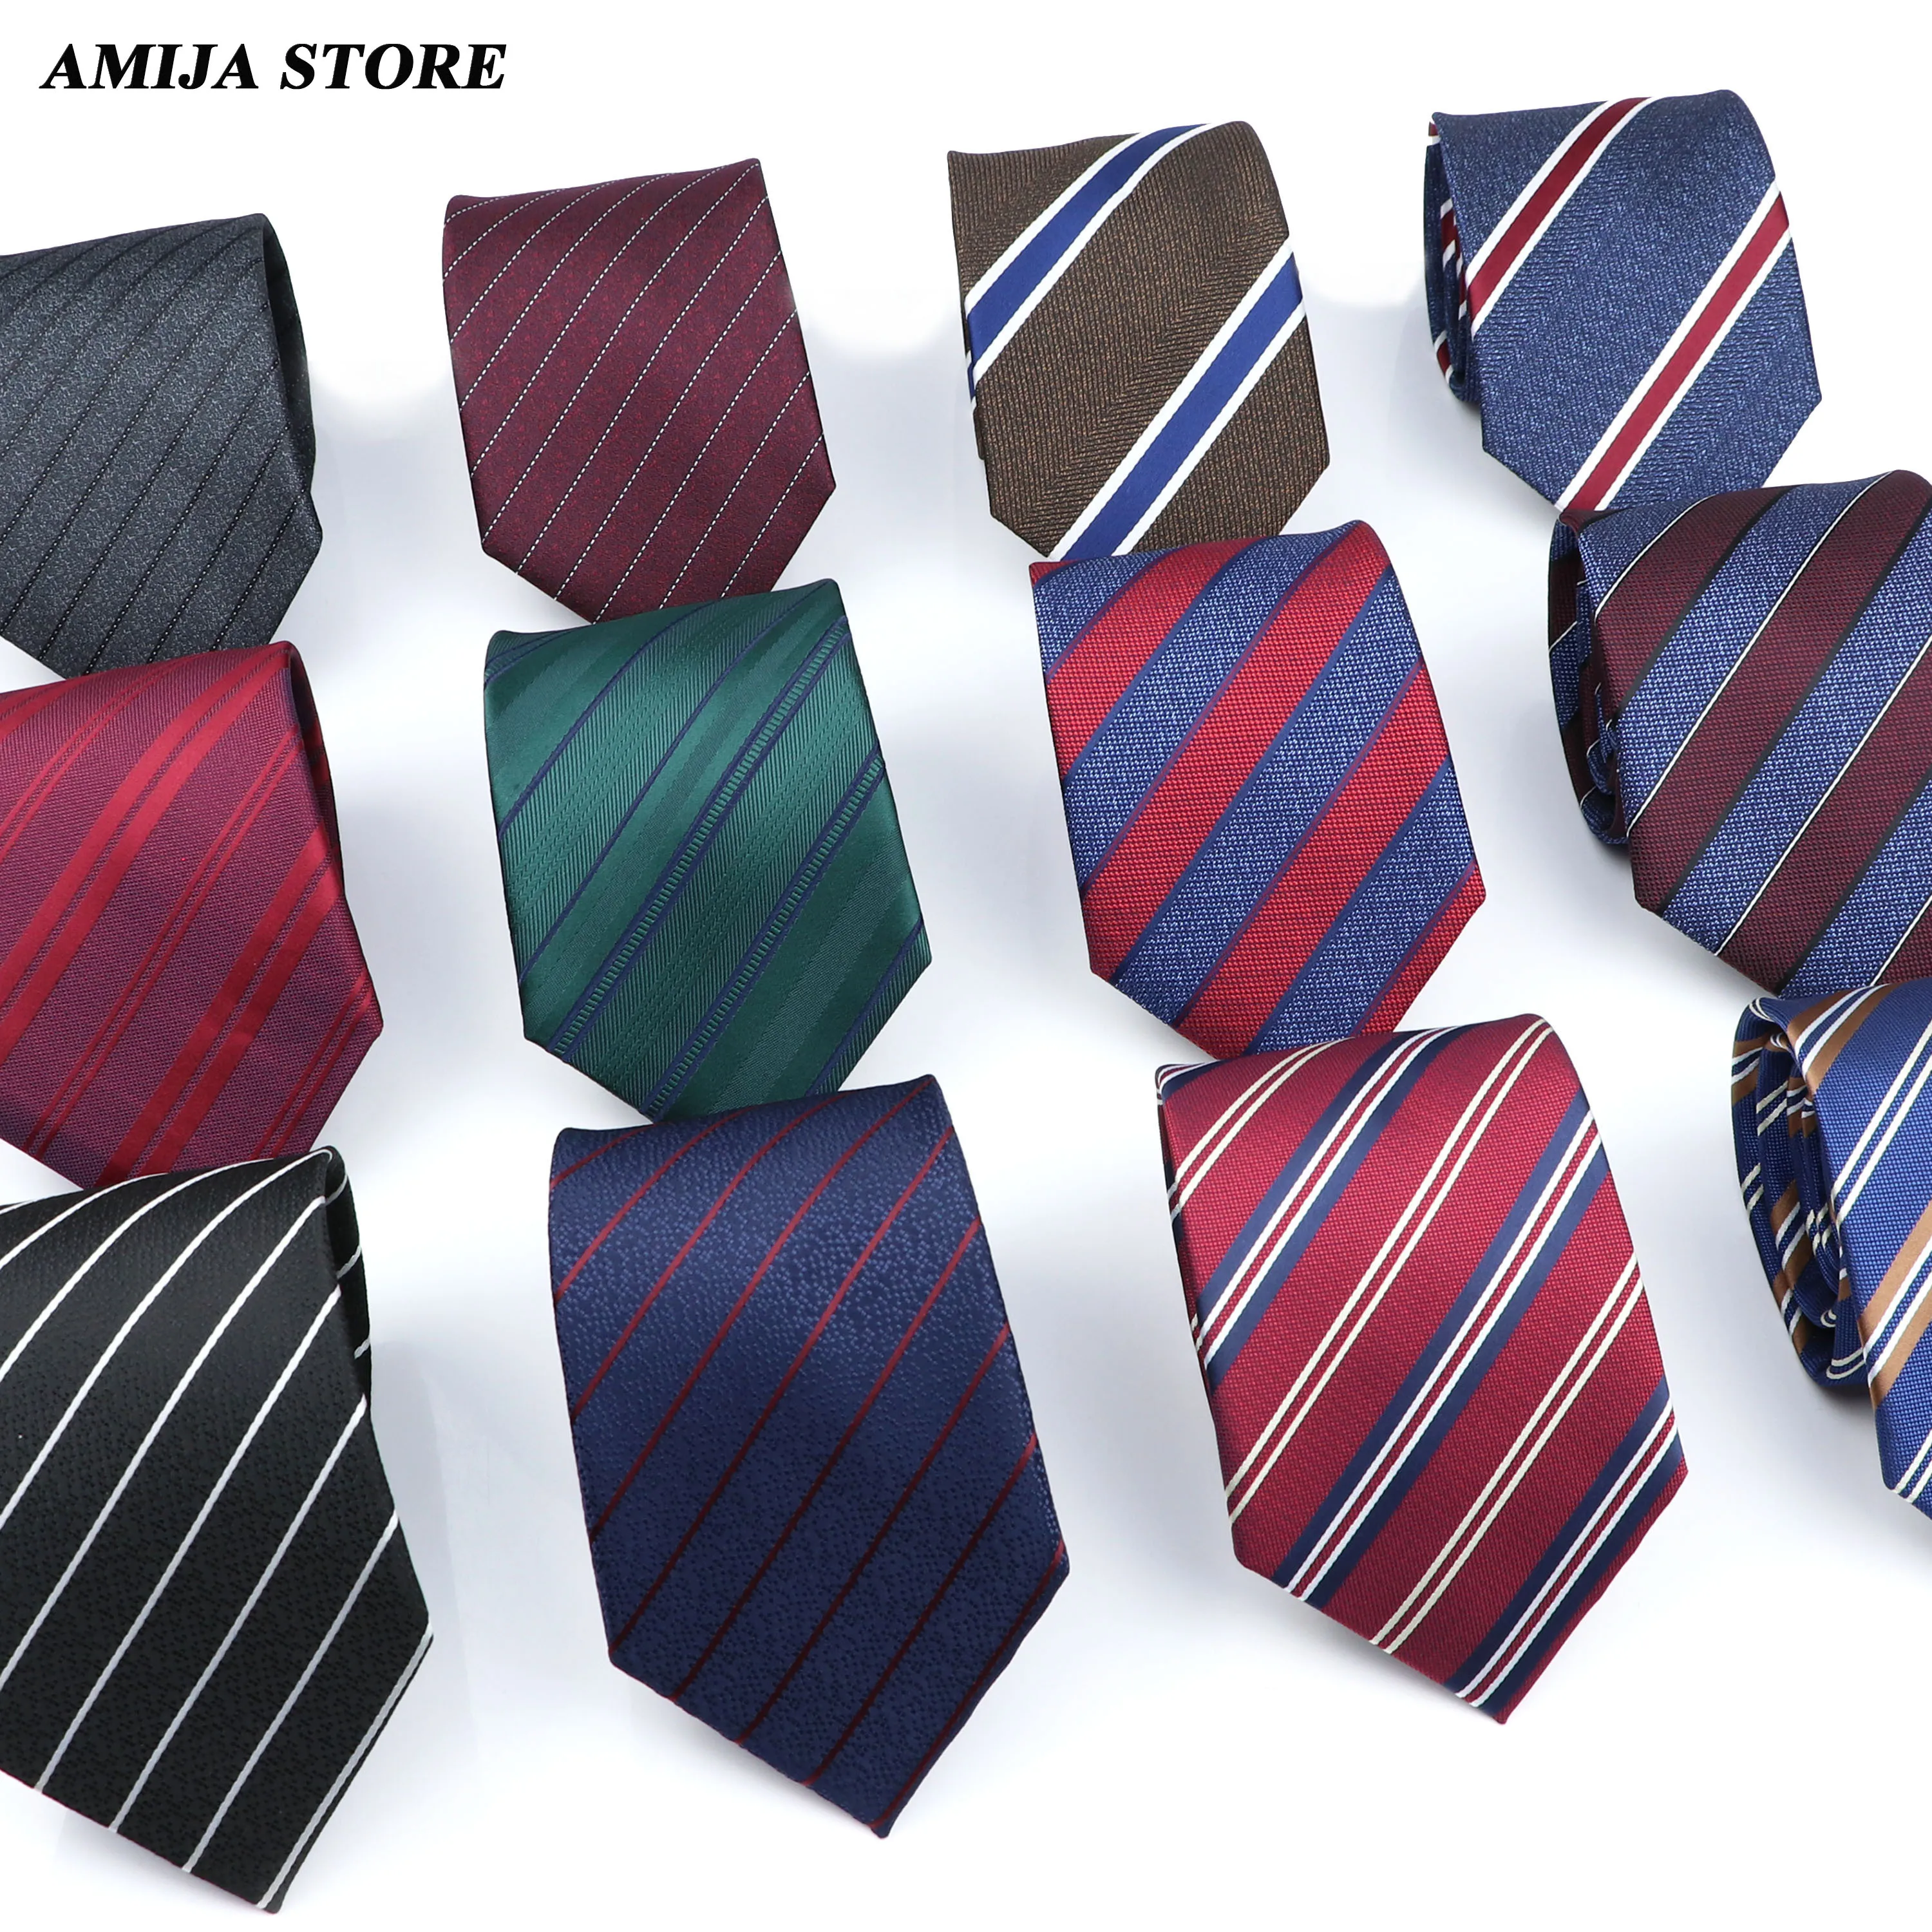 Classic Striped Ties For Men Fashion Suits Plaid Neck Tie Black Red Male Necktie For Wedding Business Party Gravata Formal Shirt